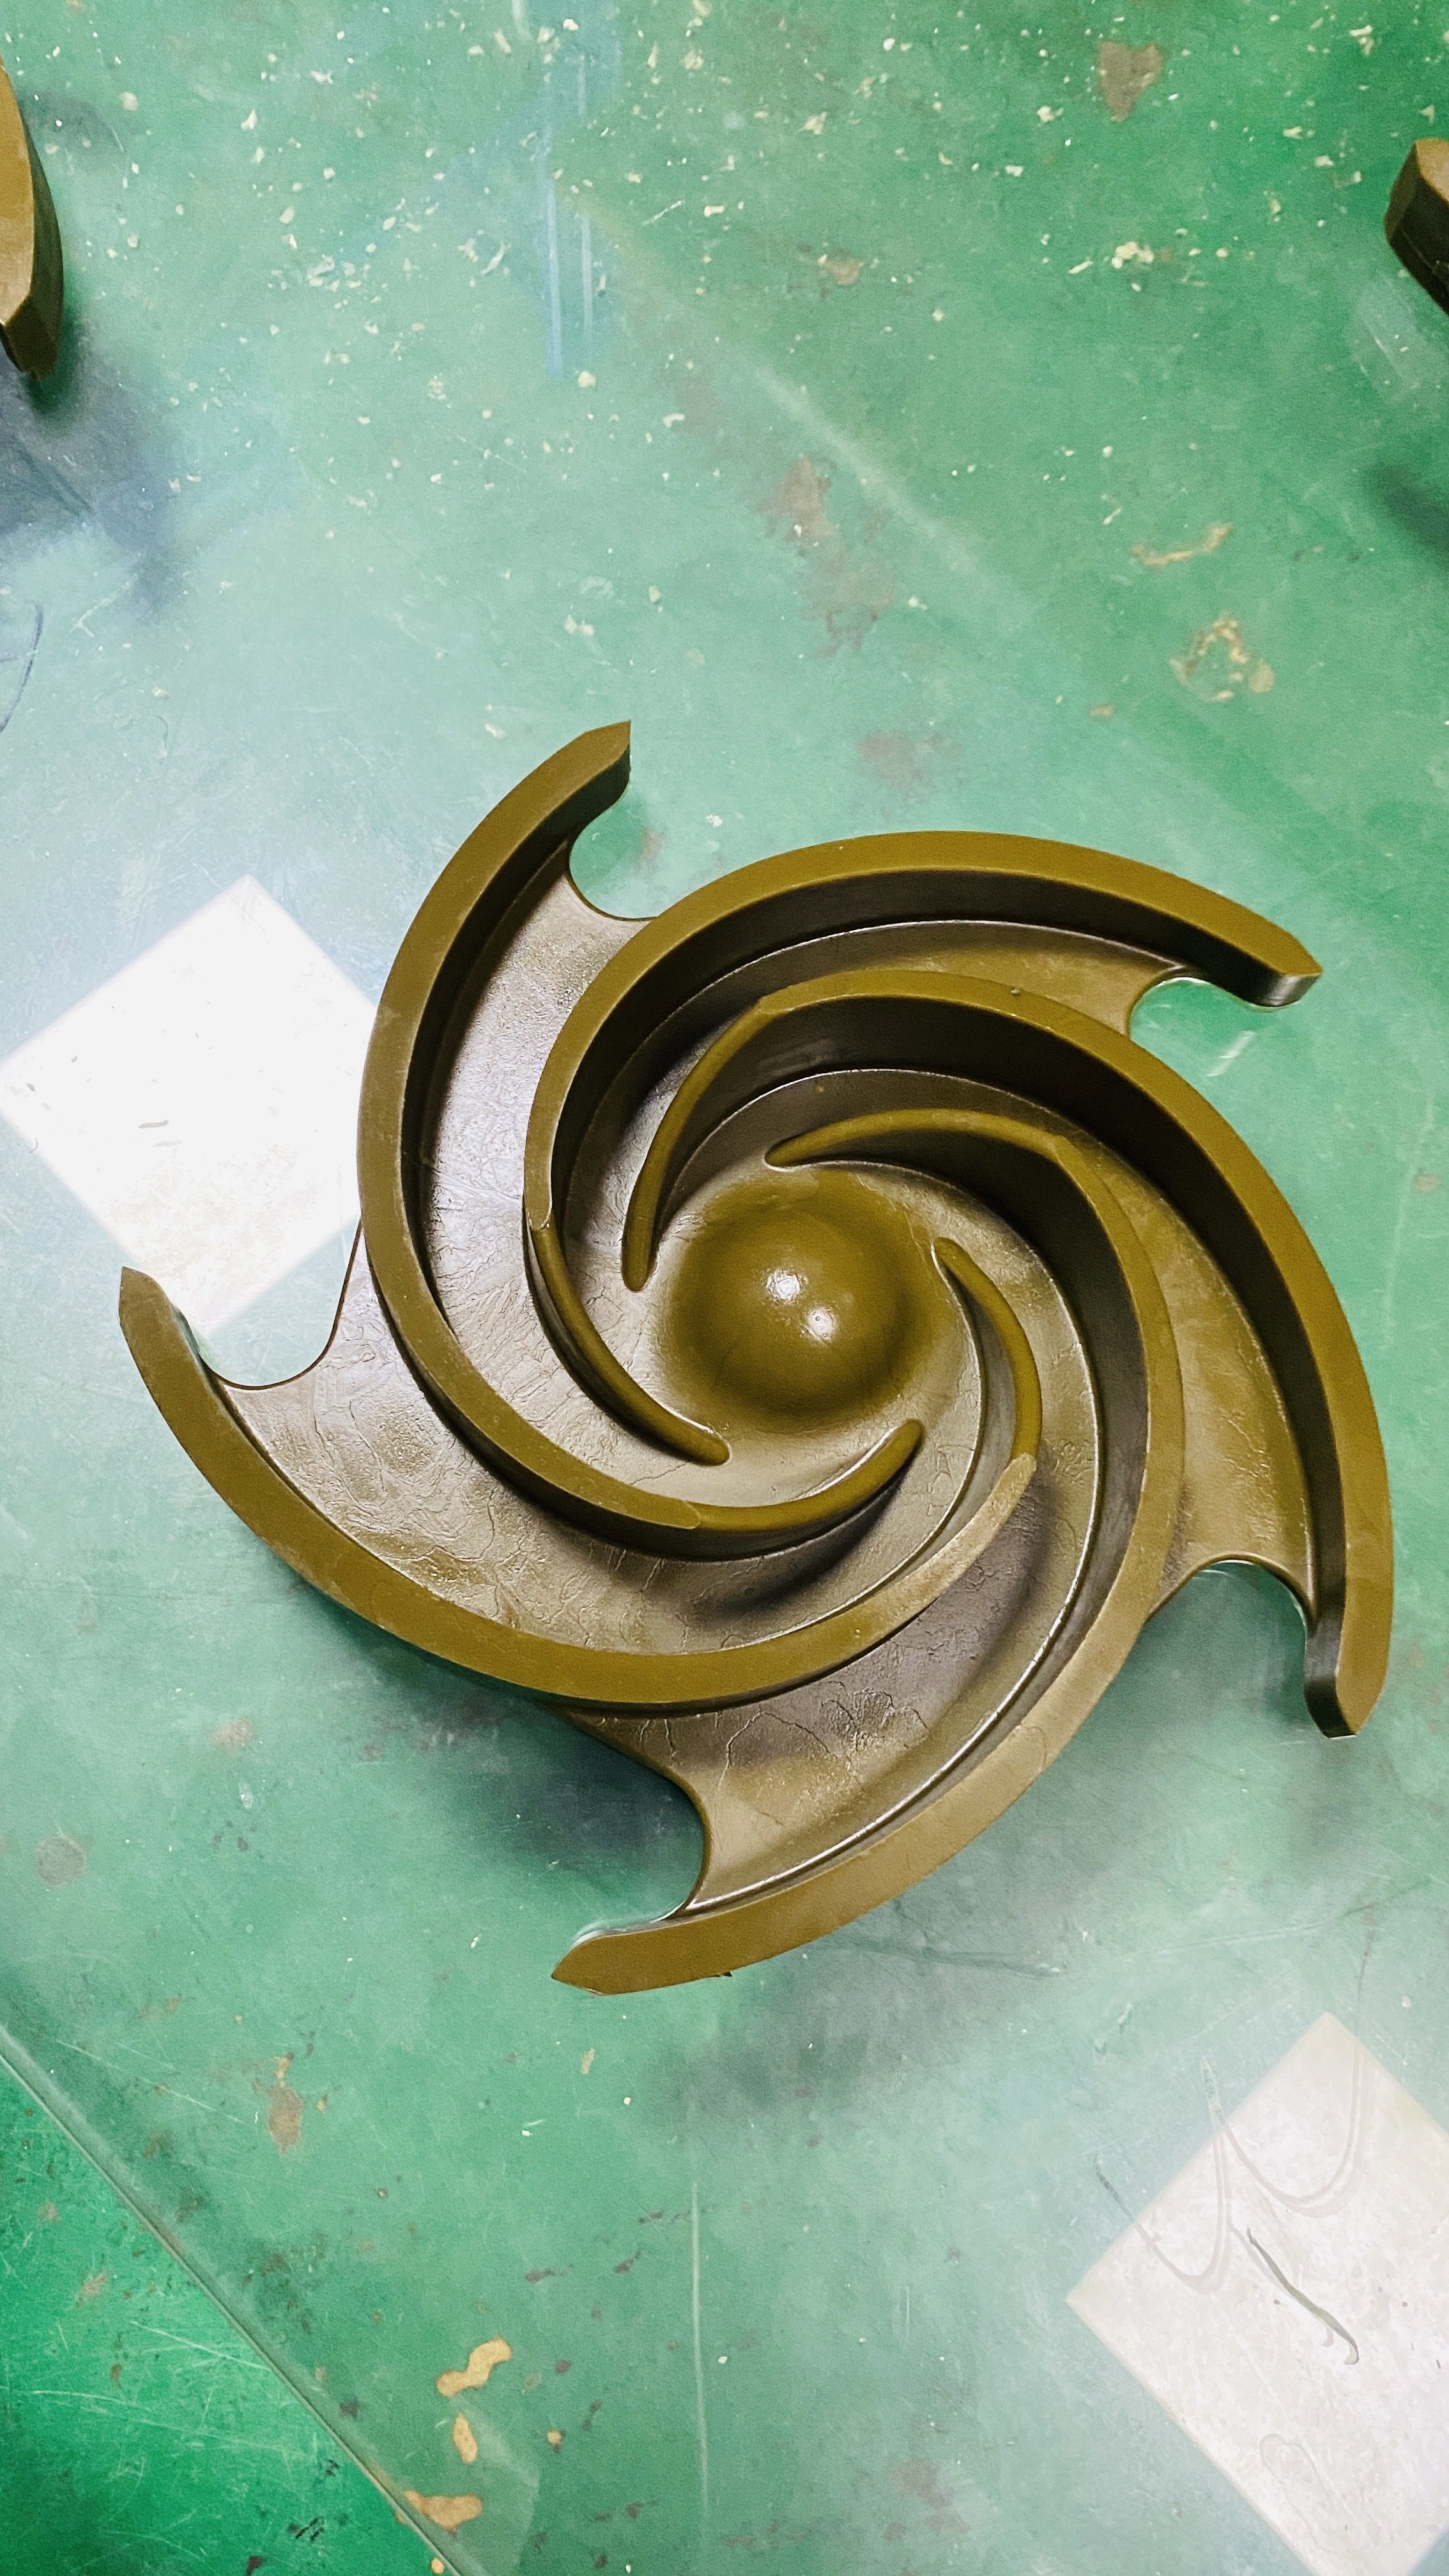 Investment casting parts